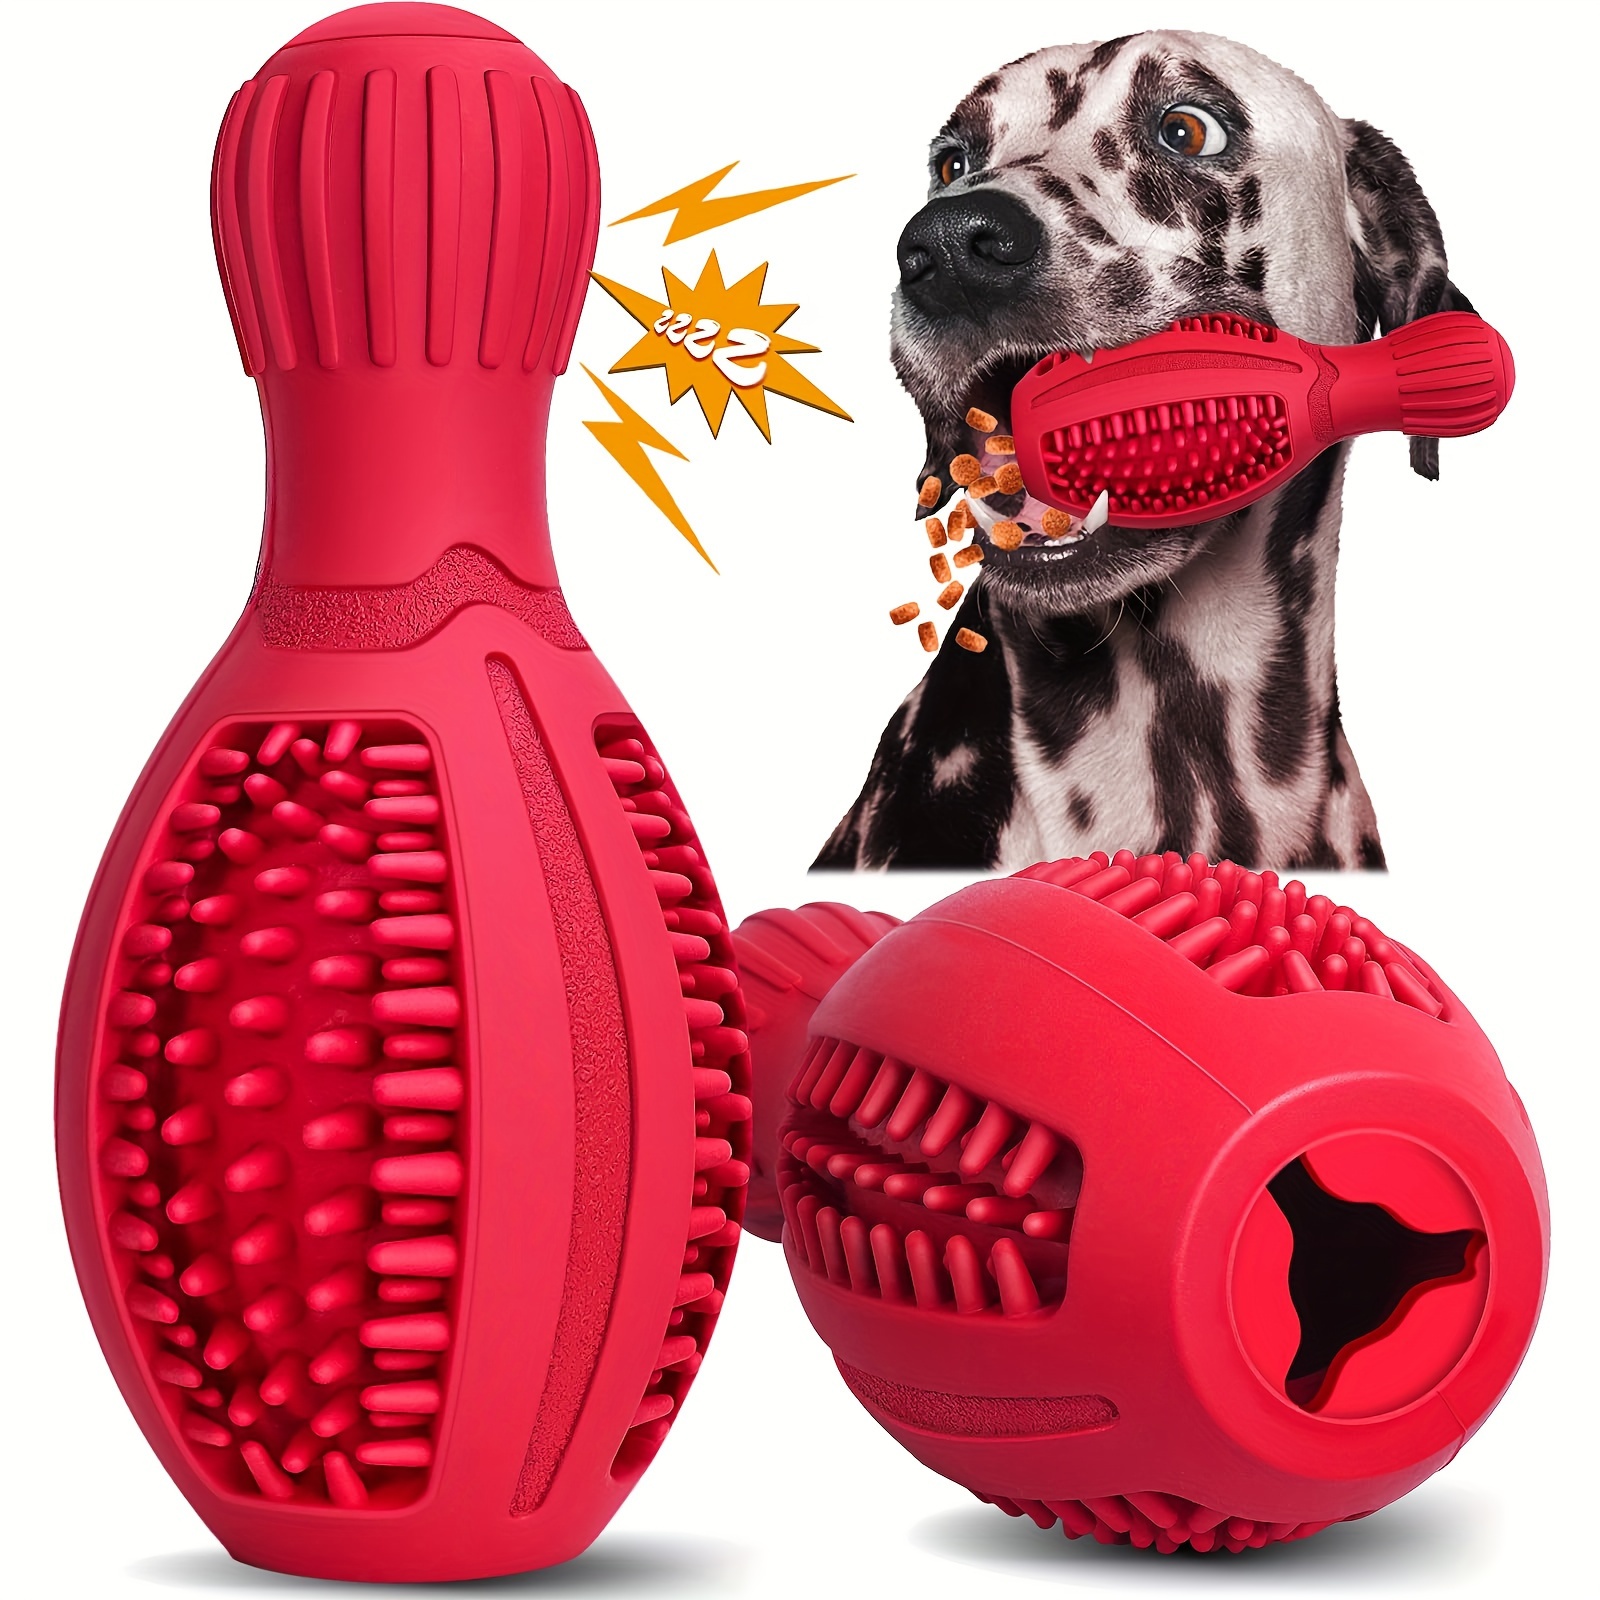 

1pc Dog Durable Chew Slow Food Dispenser Toy, Bowling Ball Shaped Dog Interactive Play Toy, Teeth Cleaning Training Toy Pet Supplies